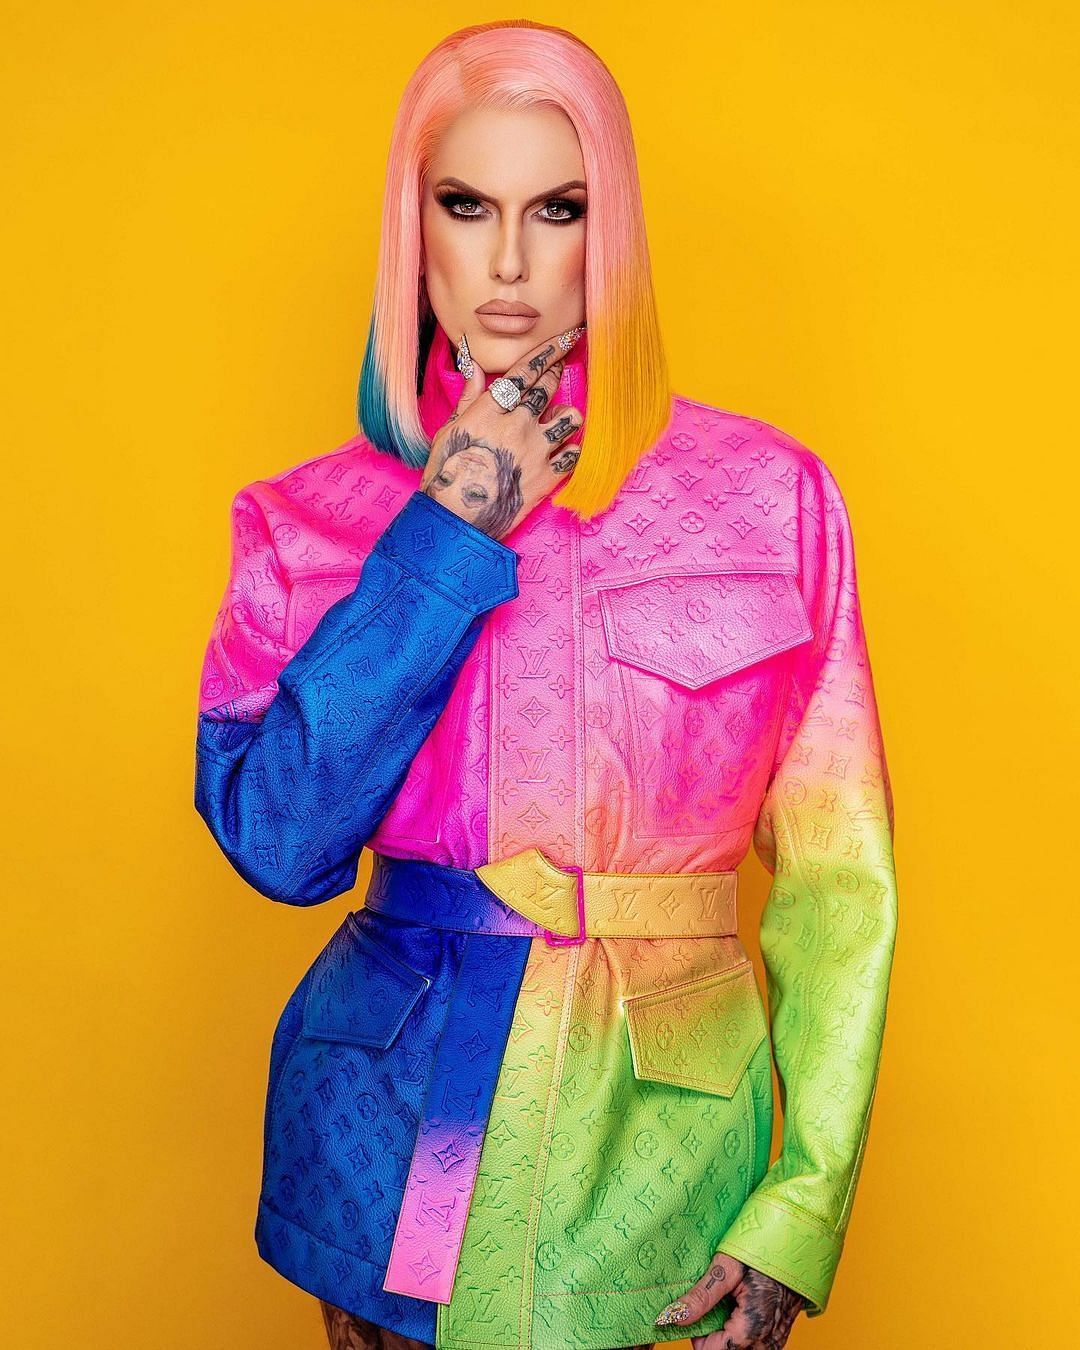 How much is Jeffree Star’s Net Worth in 2022?